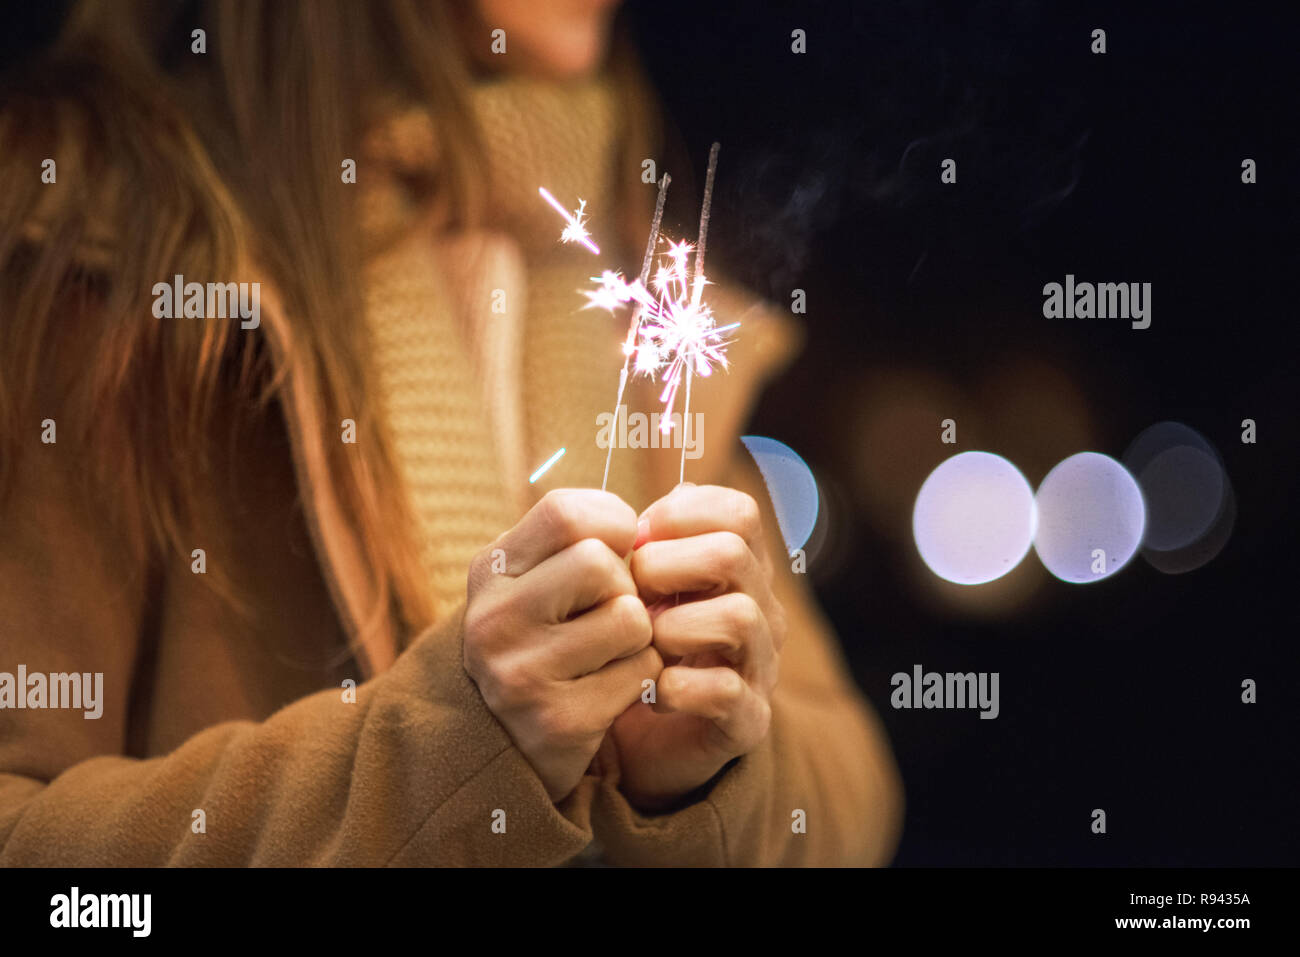 woman having fun with sparkler in her hands Stock Photo